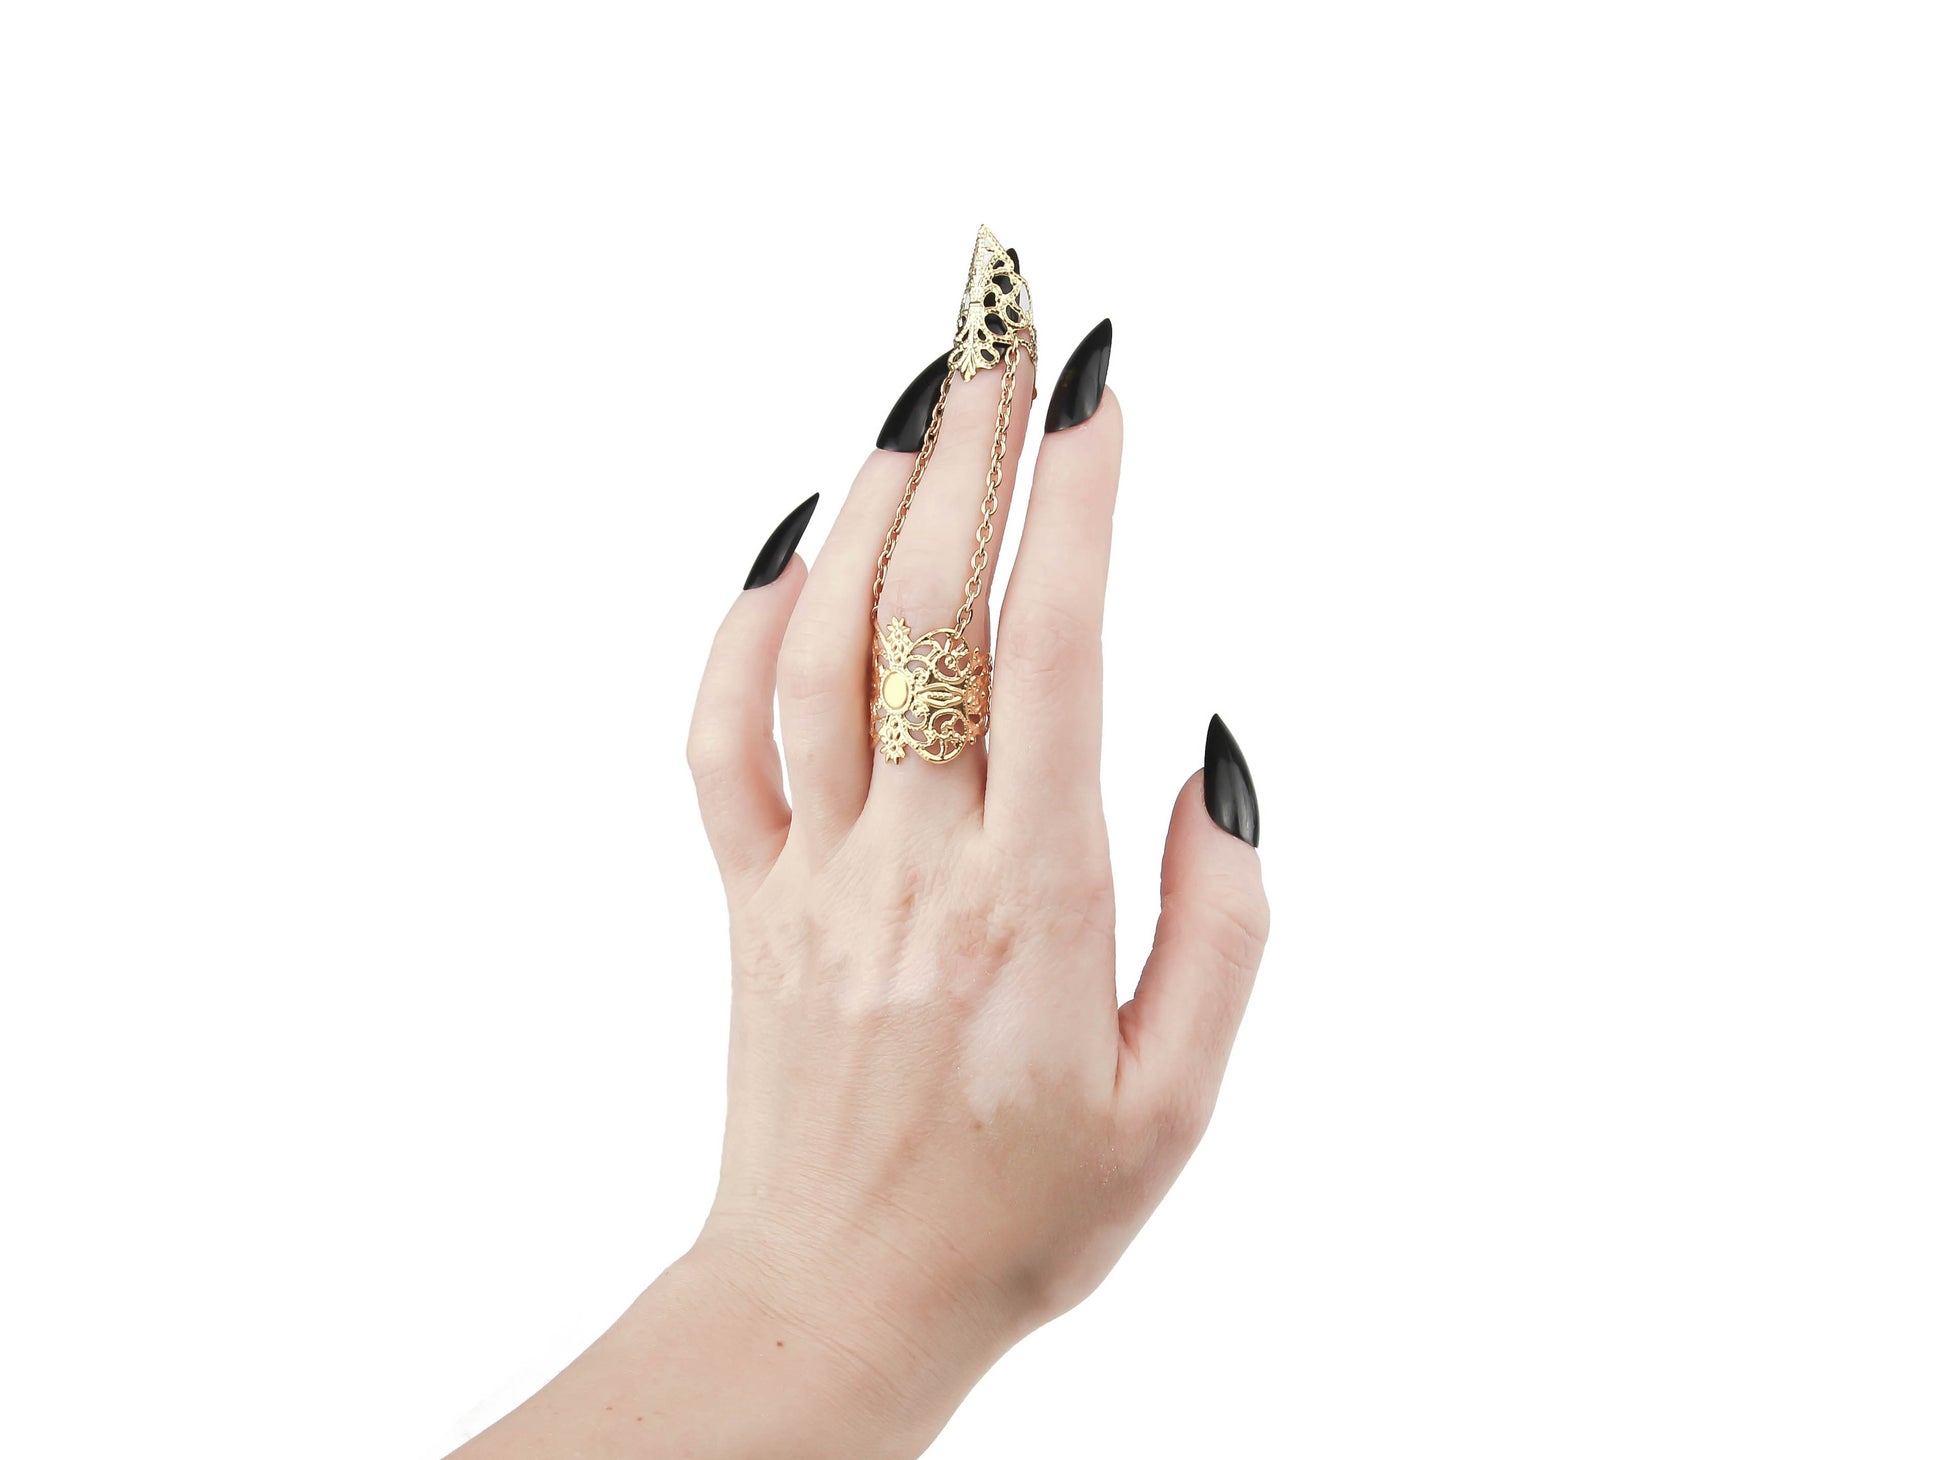 This image features a striking gold claw ring from Myril Jewels, worn on the middle finger and embodying the brand's signature dark avant-garde style. The claw ring is a quintessential piece for gothic and alternative fashion lovers, ideal for Halloween, embodying punk jewelry aesthetics, and a perfect expression of gothic-chic and whimsigoth trends. It’s a bold addition to any ensemble, from everyday wear to festival gear, and a unique goth girlfriend gift.